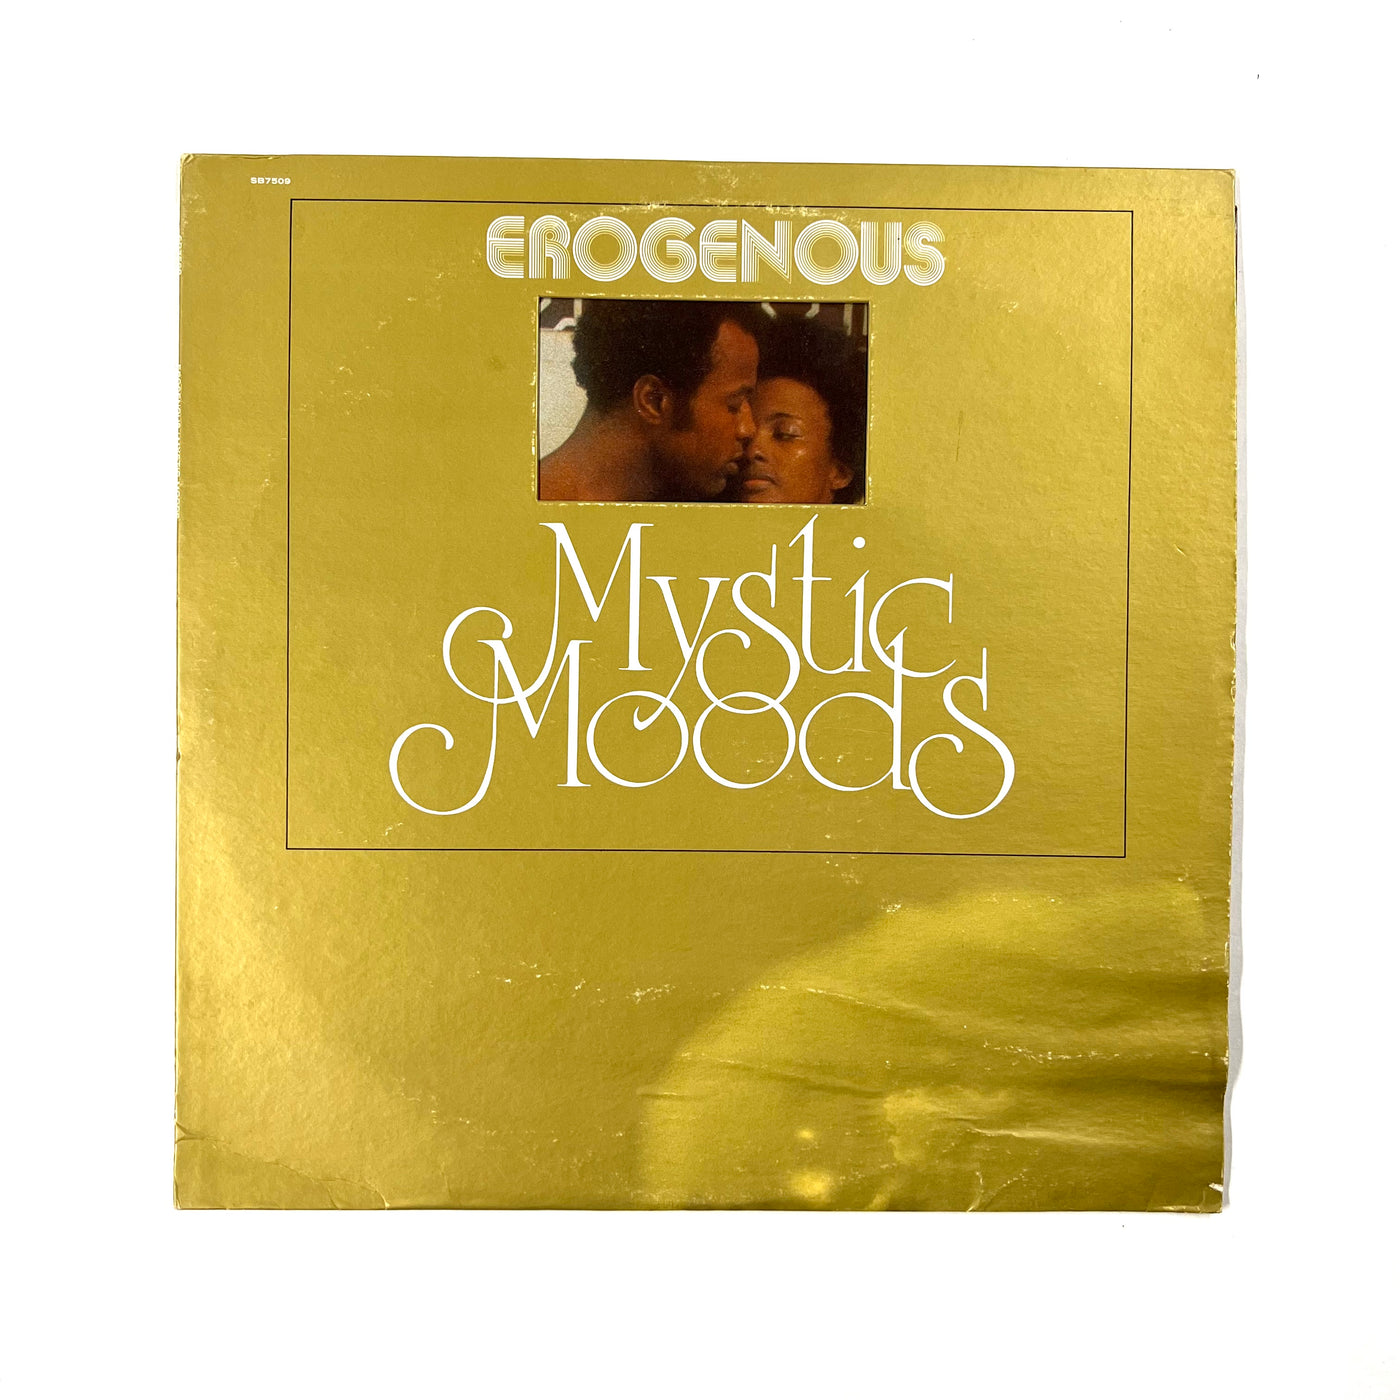 The Mystic Moods Orchestra - Erogenous